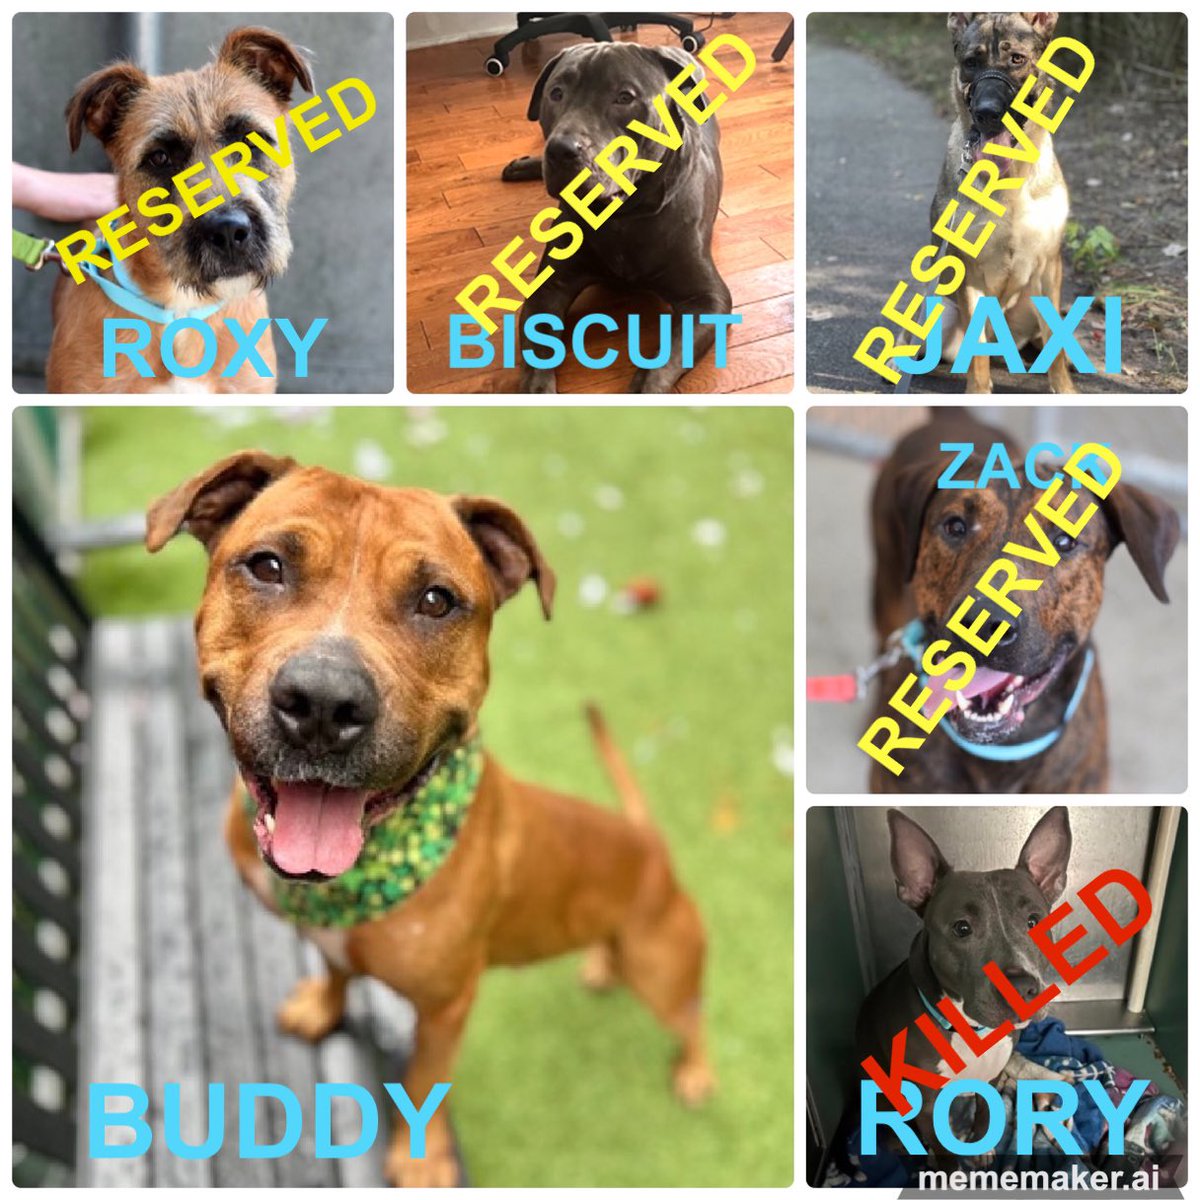 🆘🆘 #SAVE BUDDY ACTIVE KILL☠️COMMAND #NYCACC #AdoptDontShop ❤️‍🩹BUDDY 5yrs Adoptable He’s a good boy in a bad place Owner passed away😢BUDDY is sad/looking 4 someone 2 luv him! Likes walks &treats🍖🧀🦴 #PLEDGE #FOSTER #ADOPT 📧nycdogslivesmatter@gmail.com DM @notthesameone2